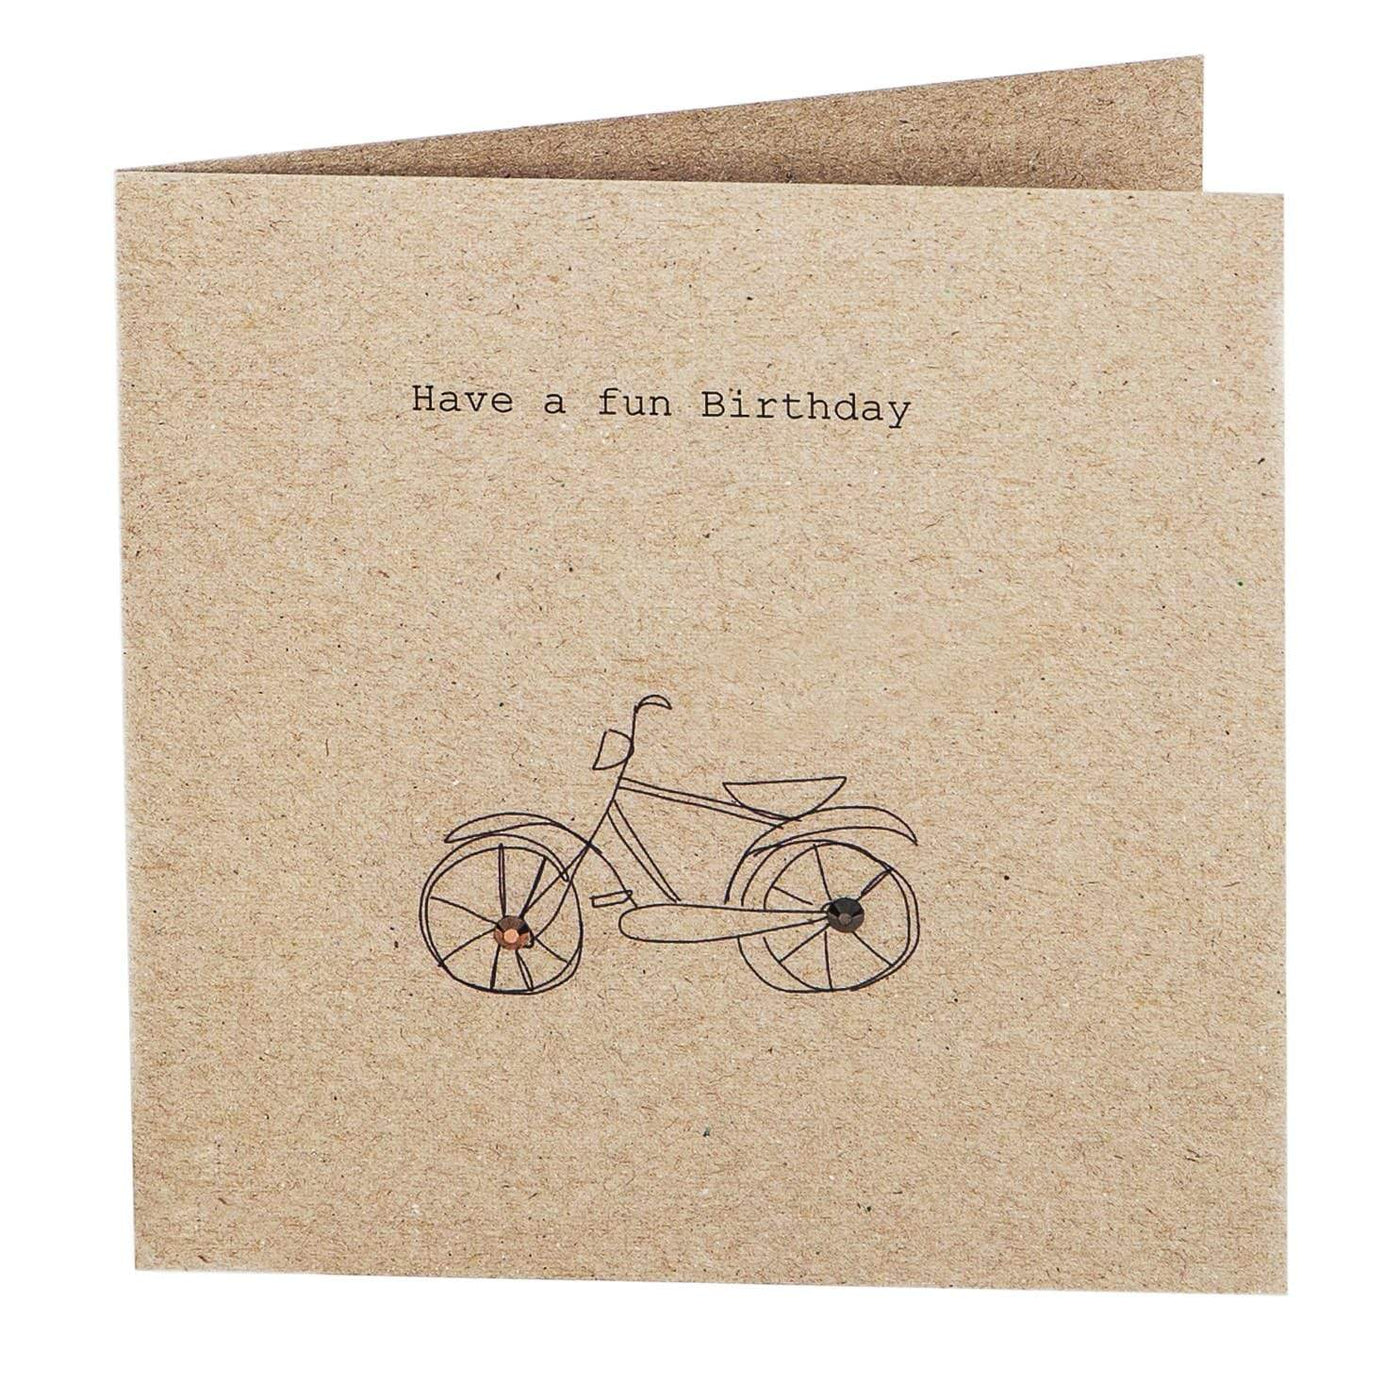 Print Circus Embellished Greetings Card NT08 Have a Fun Day (bike) square embellished card